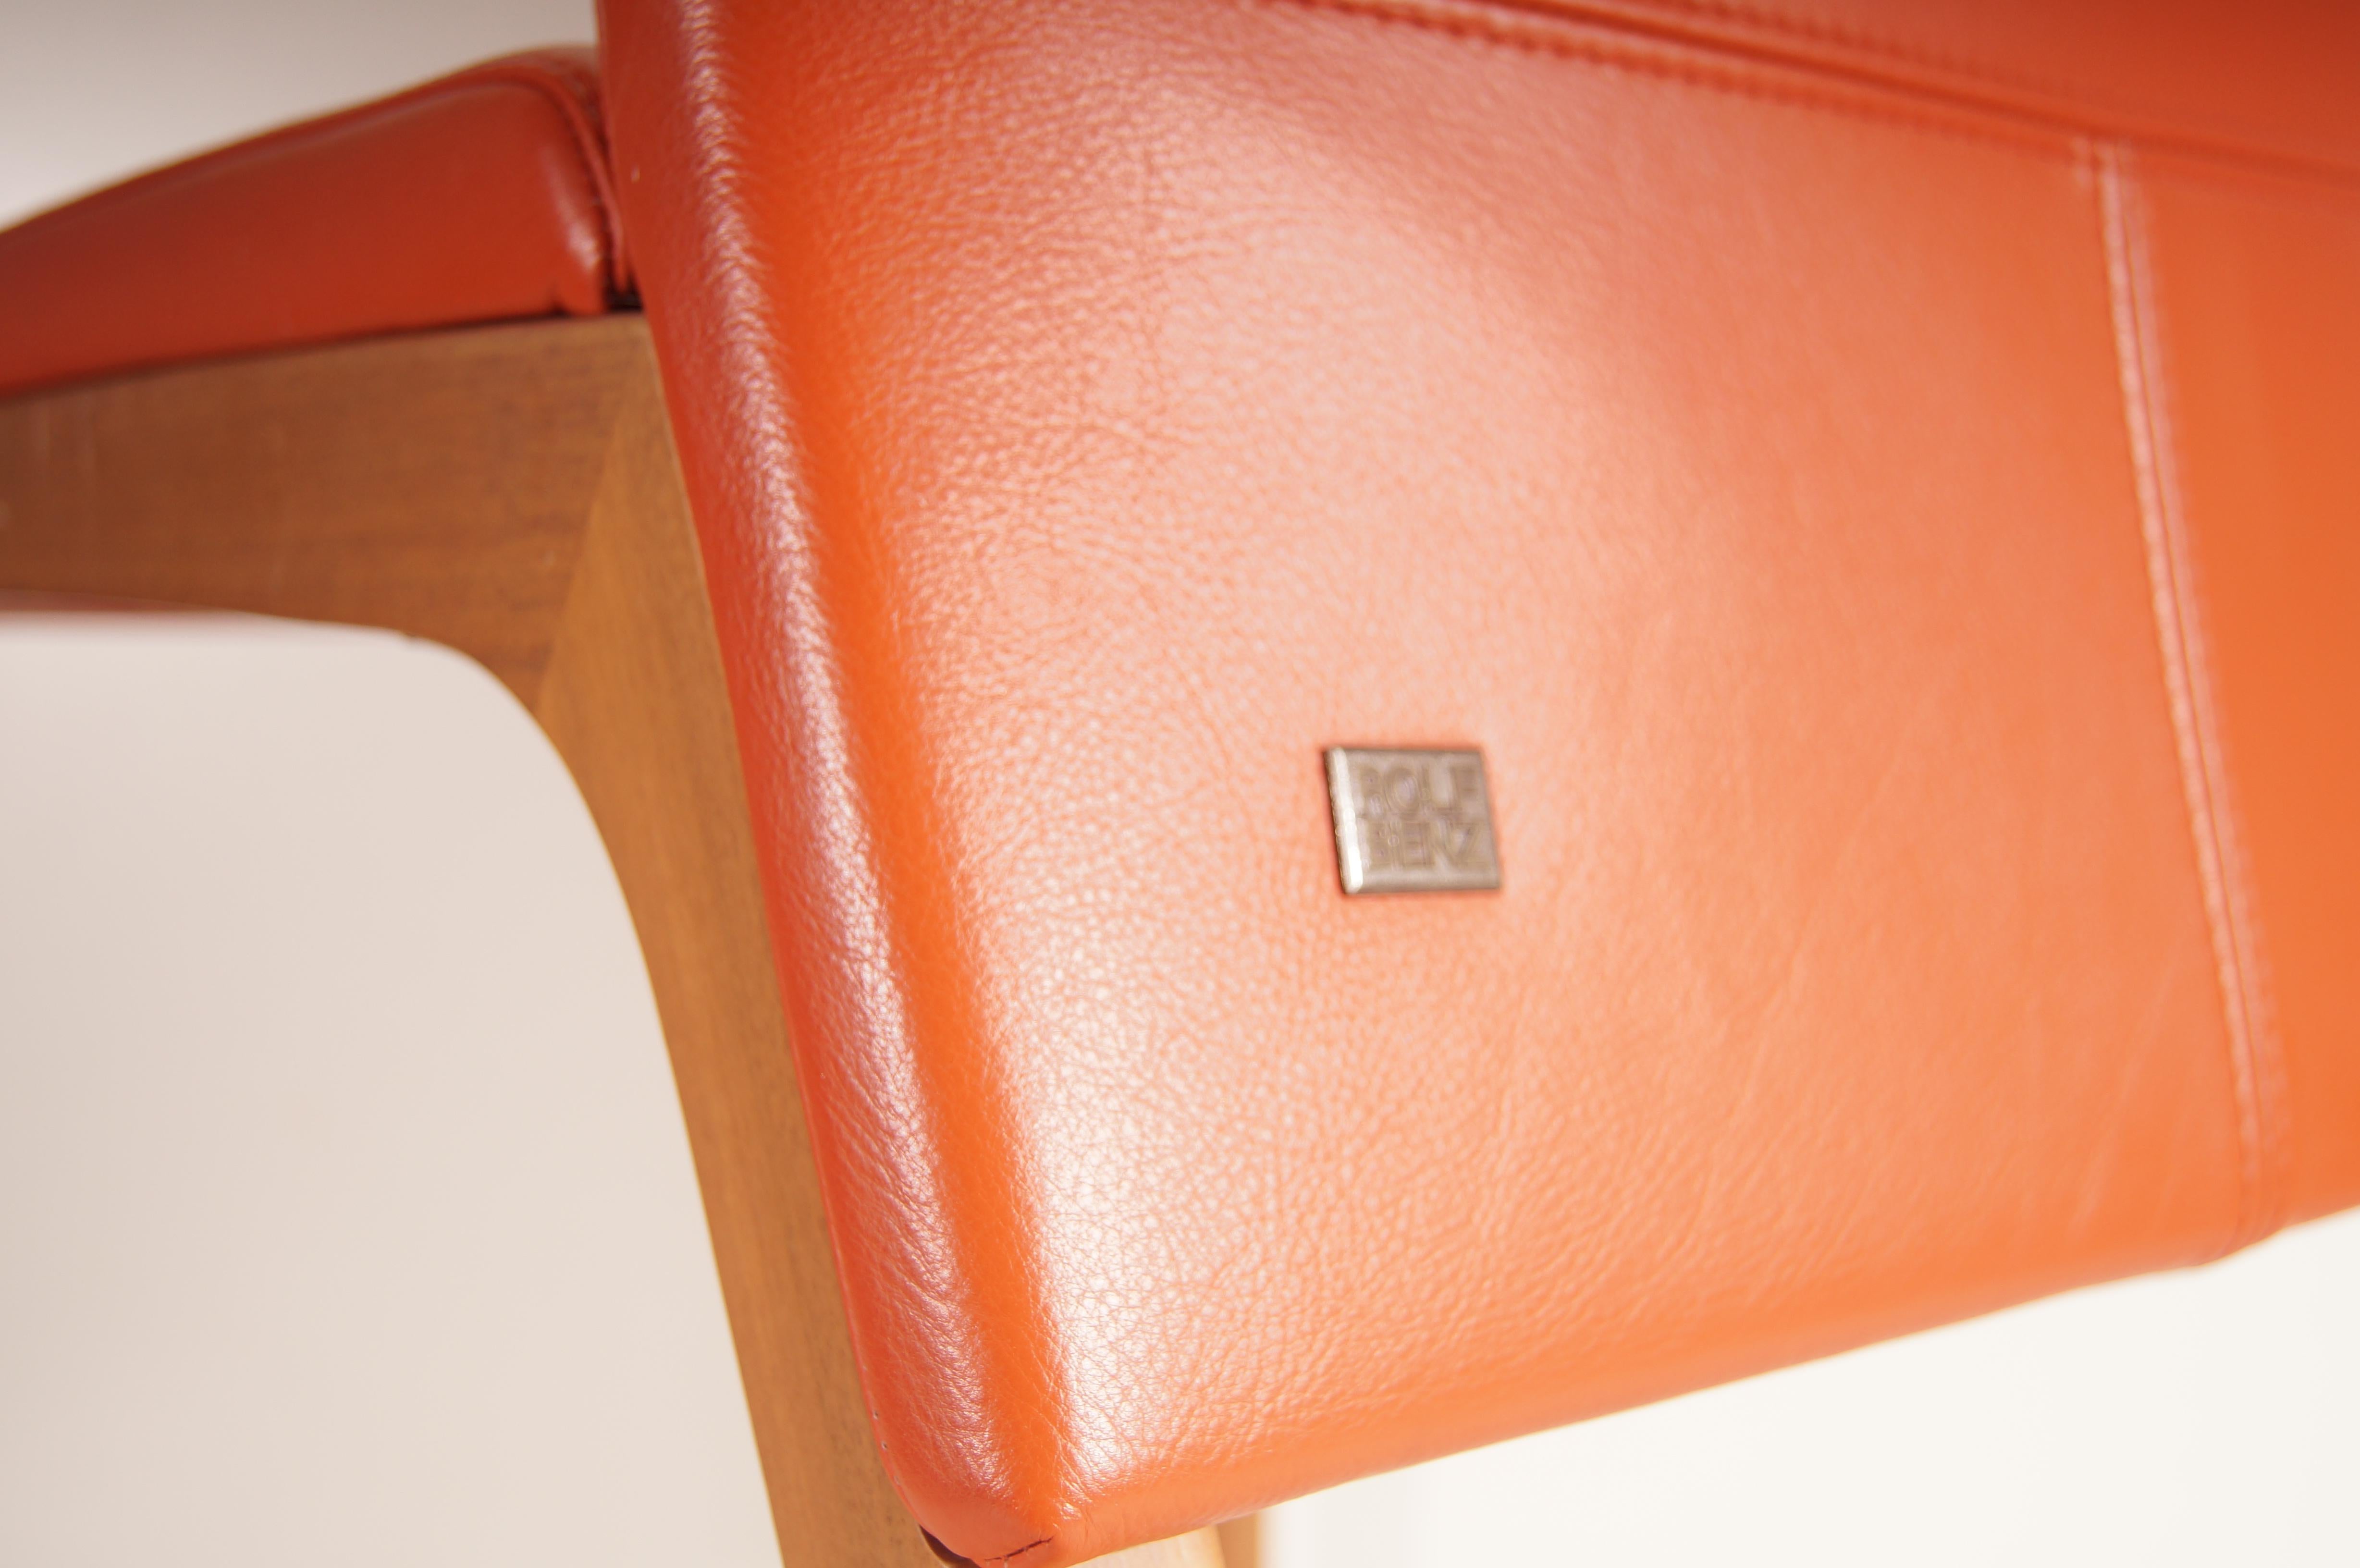 Leather Rolf Benz - Dining room chair in orange leather